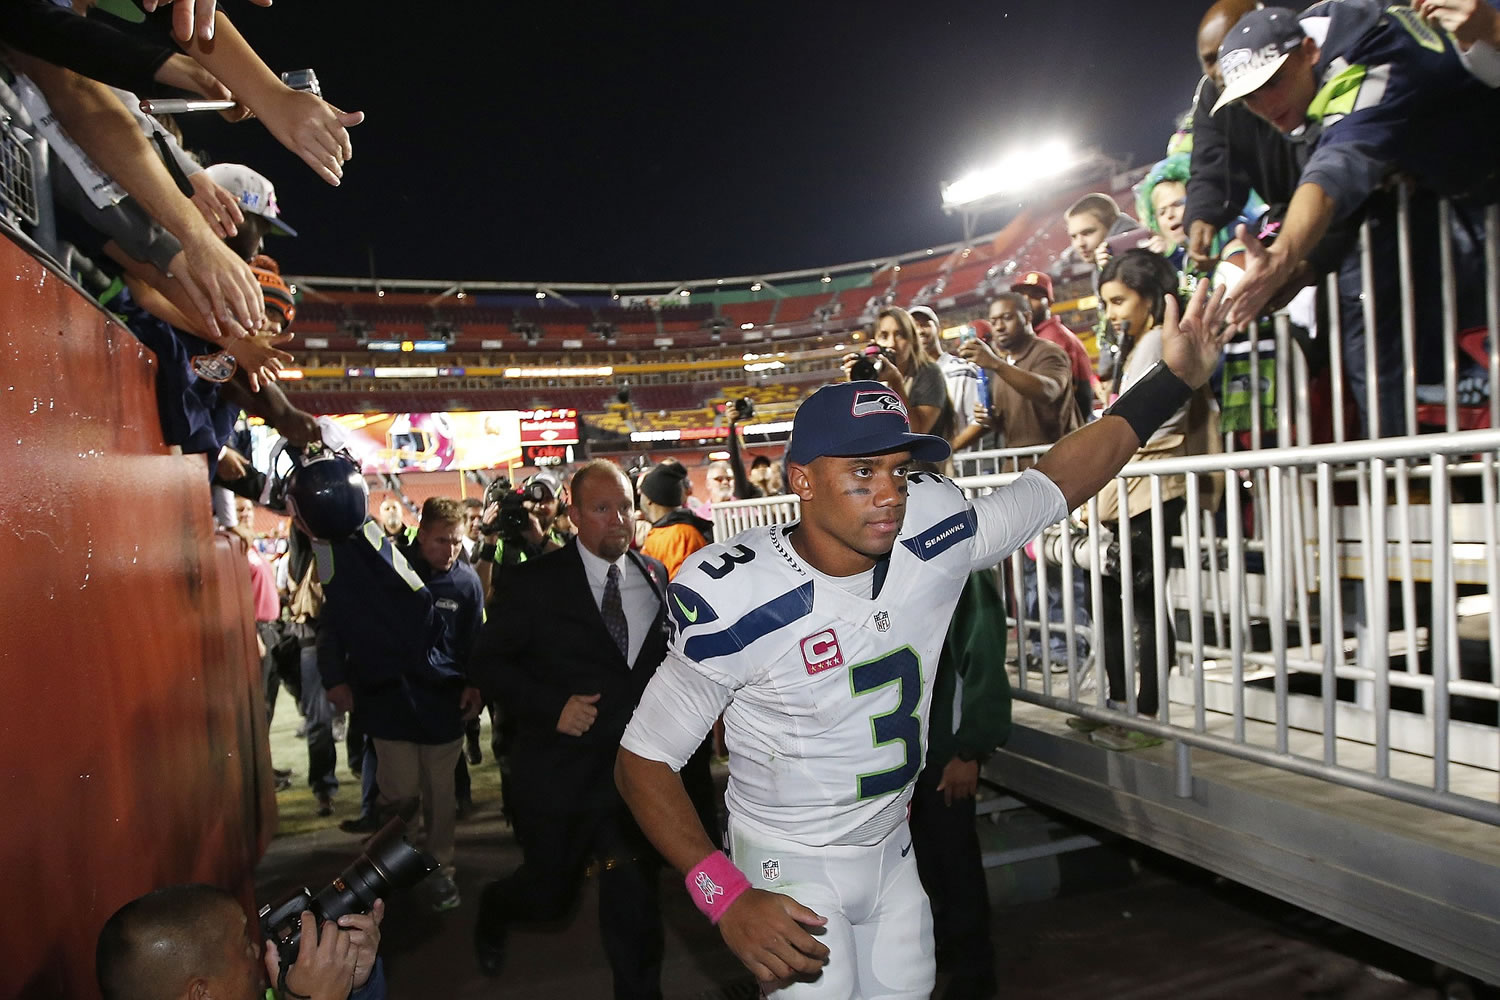 Seattle Seahawks quarterback Russell Wilson (3) reaches for the fans as he leaves the field  an NFL football game against the Washington Redskins in Landover, Md., Monday, Oct. 6, 2014. Seattle defeated Washington 27-17.